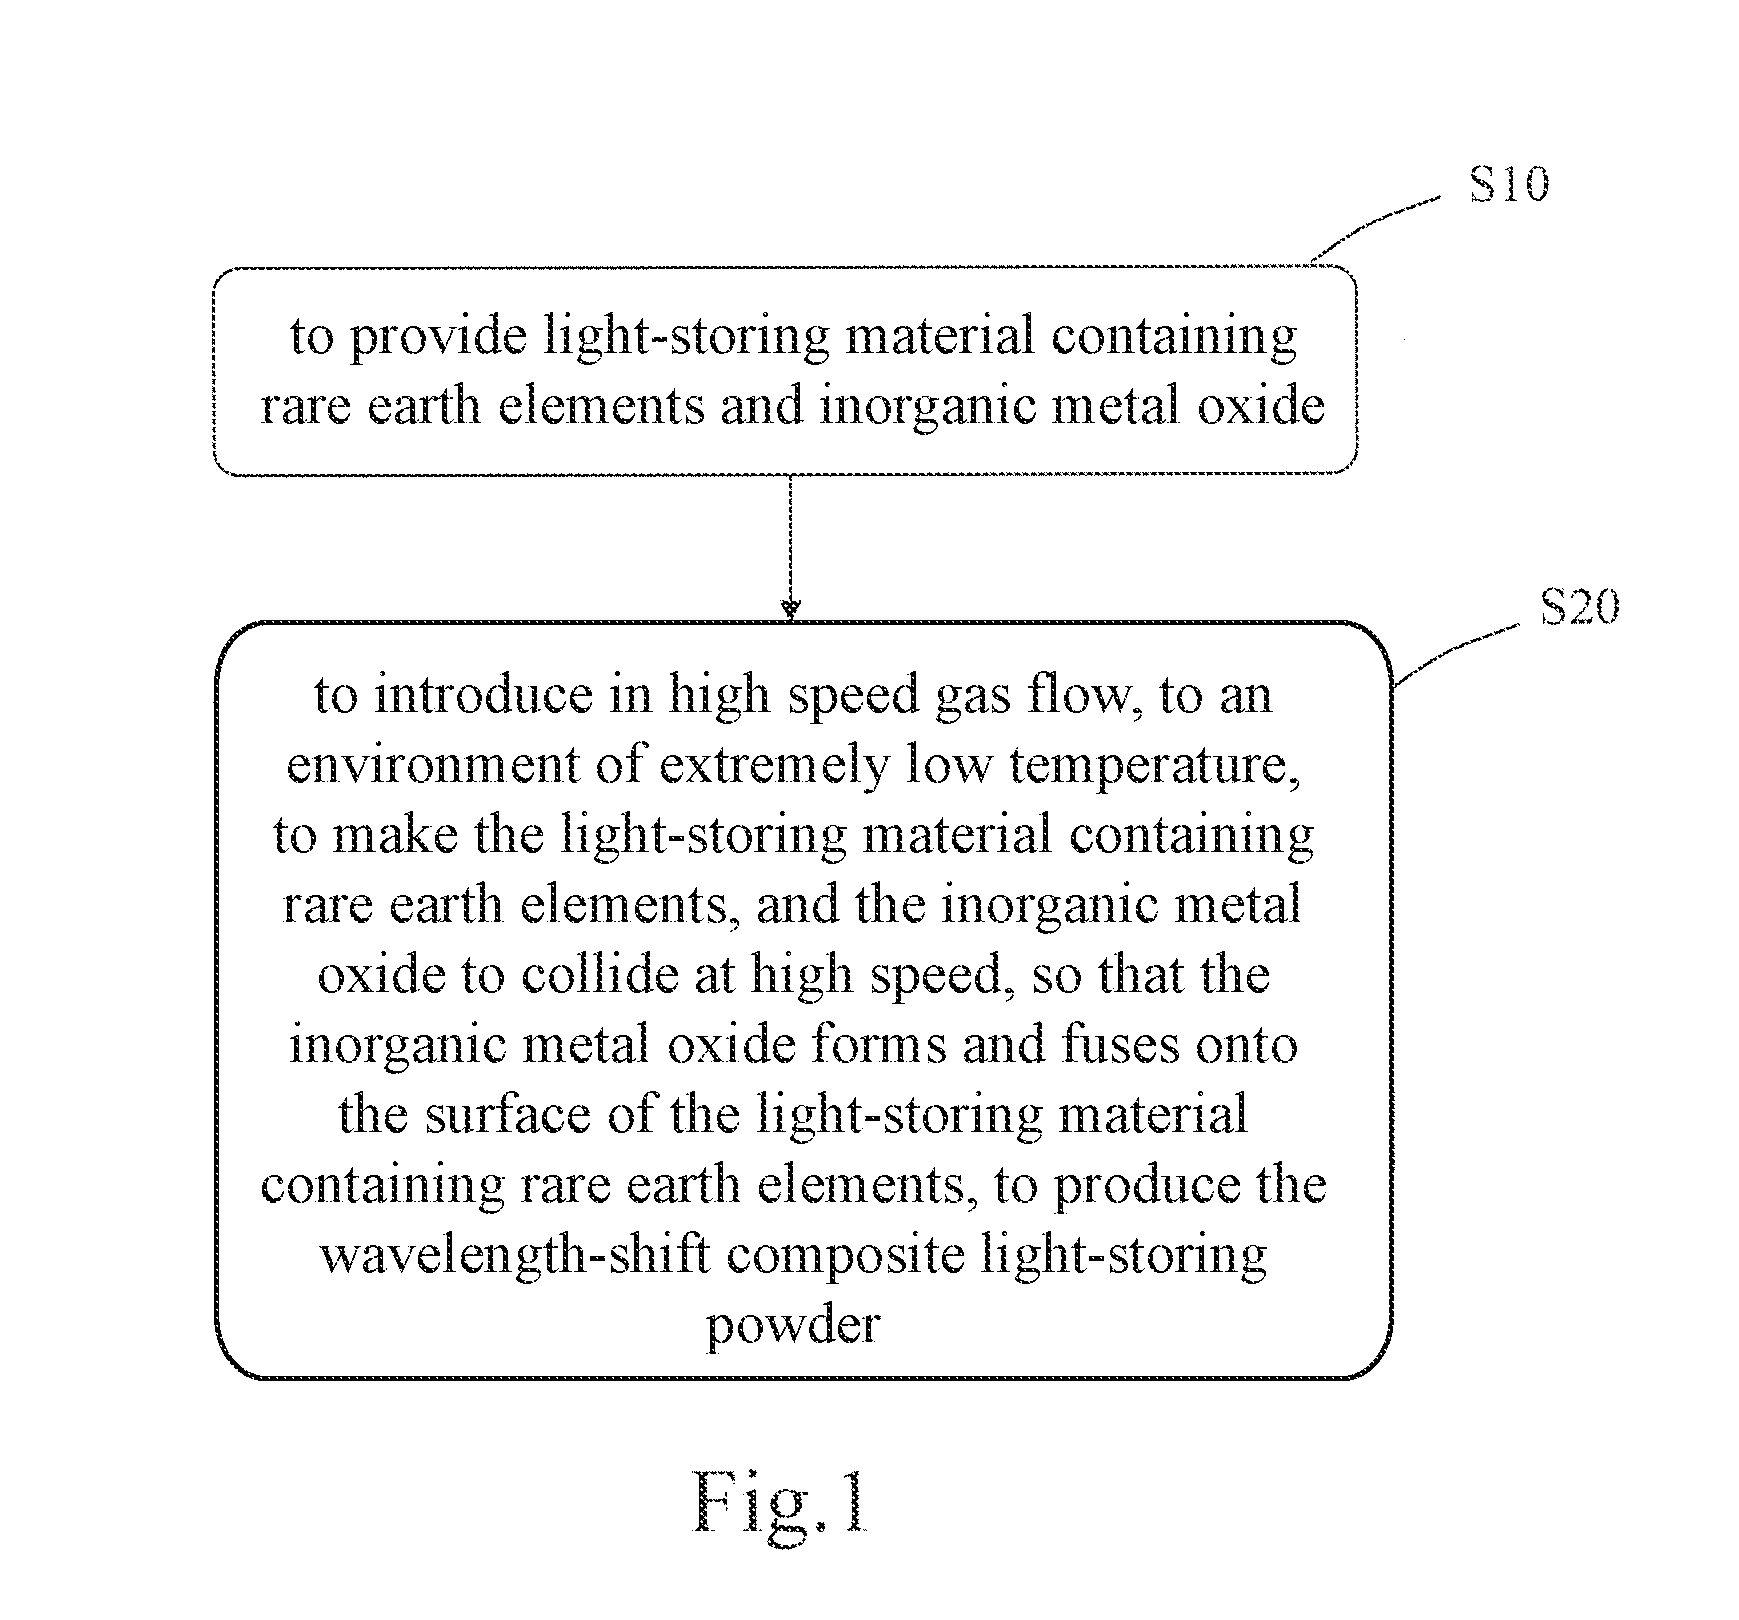 Wavelength-shift composite light-storing powder and method of manufacturing and applying the same